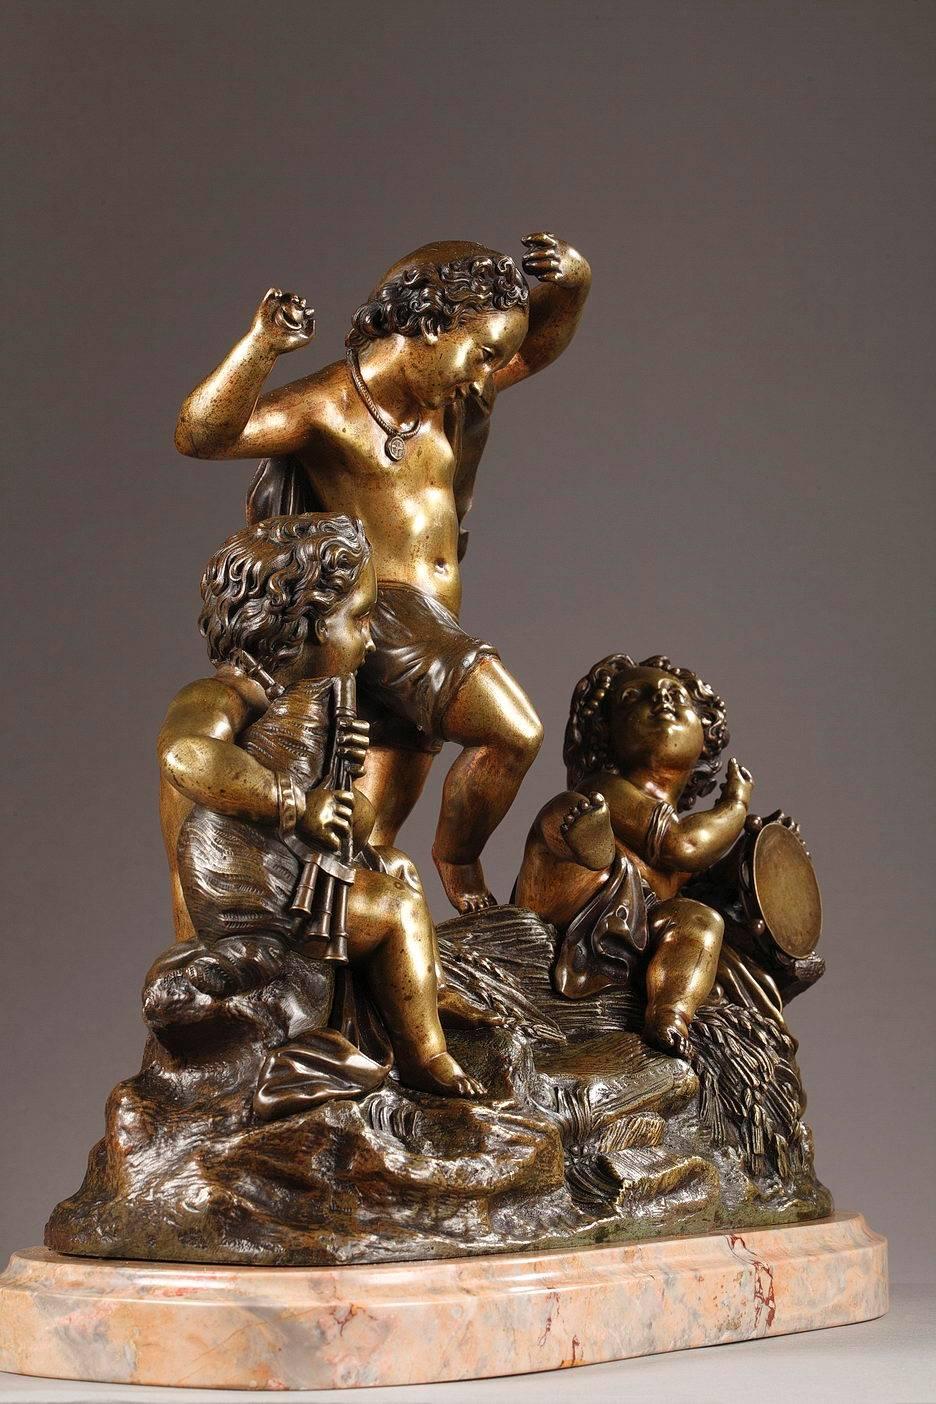 Bronze group representing three putti on a cliff strewn with wheat. Two of the cupids are playing the drum and bagpipe while the third one dances. The dancing cupid is wearing a flowing cloth while playing the castanets. The set is resting on a